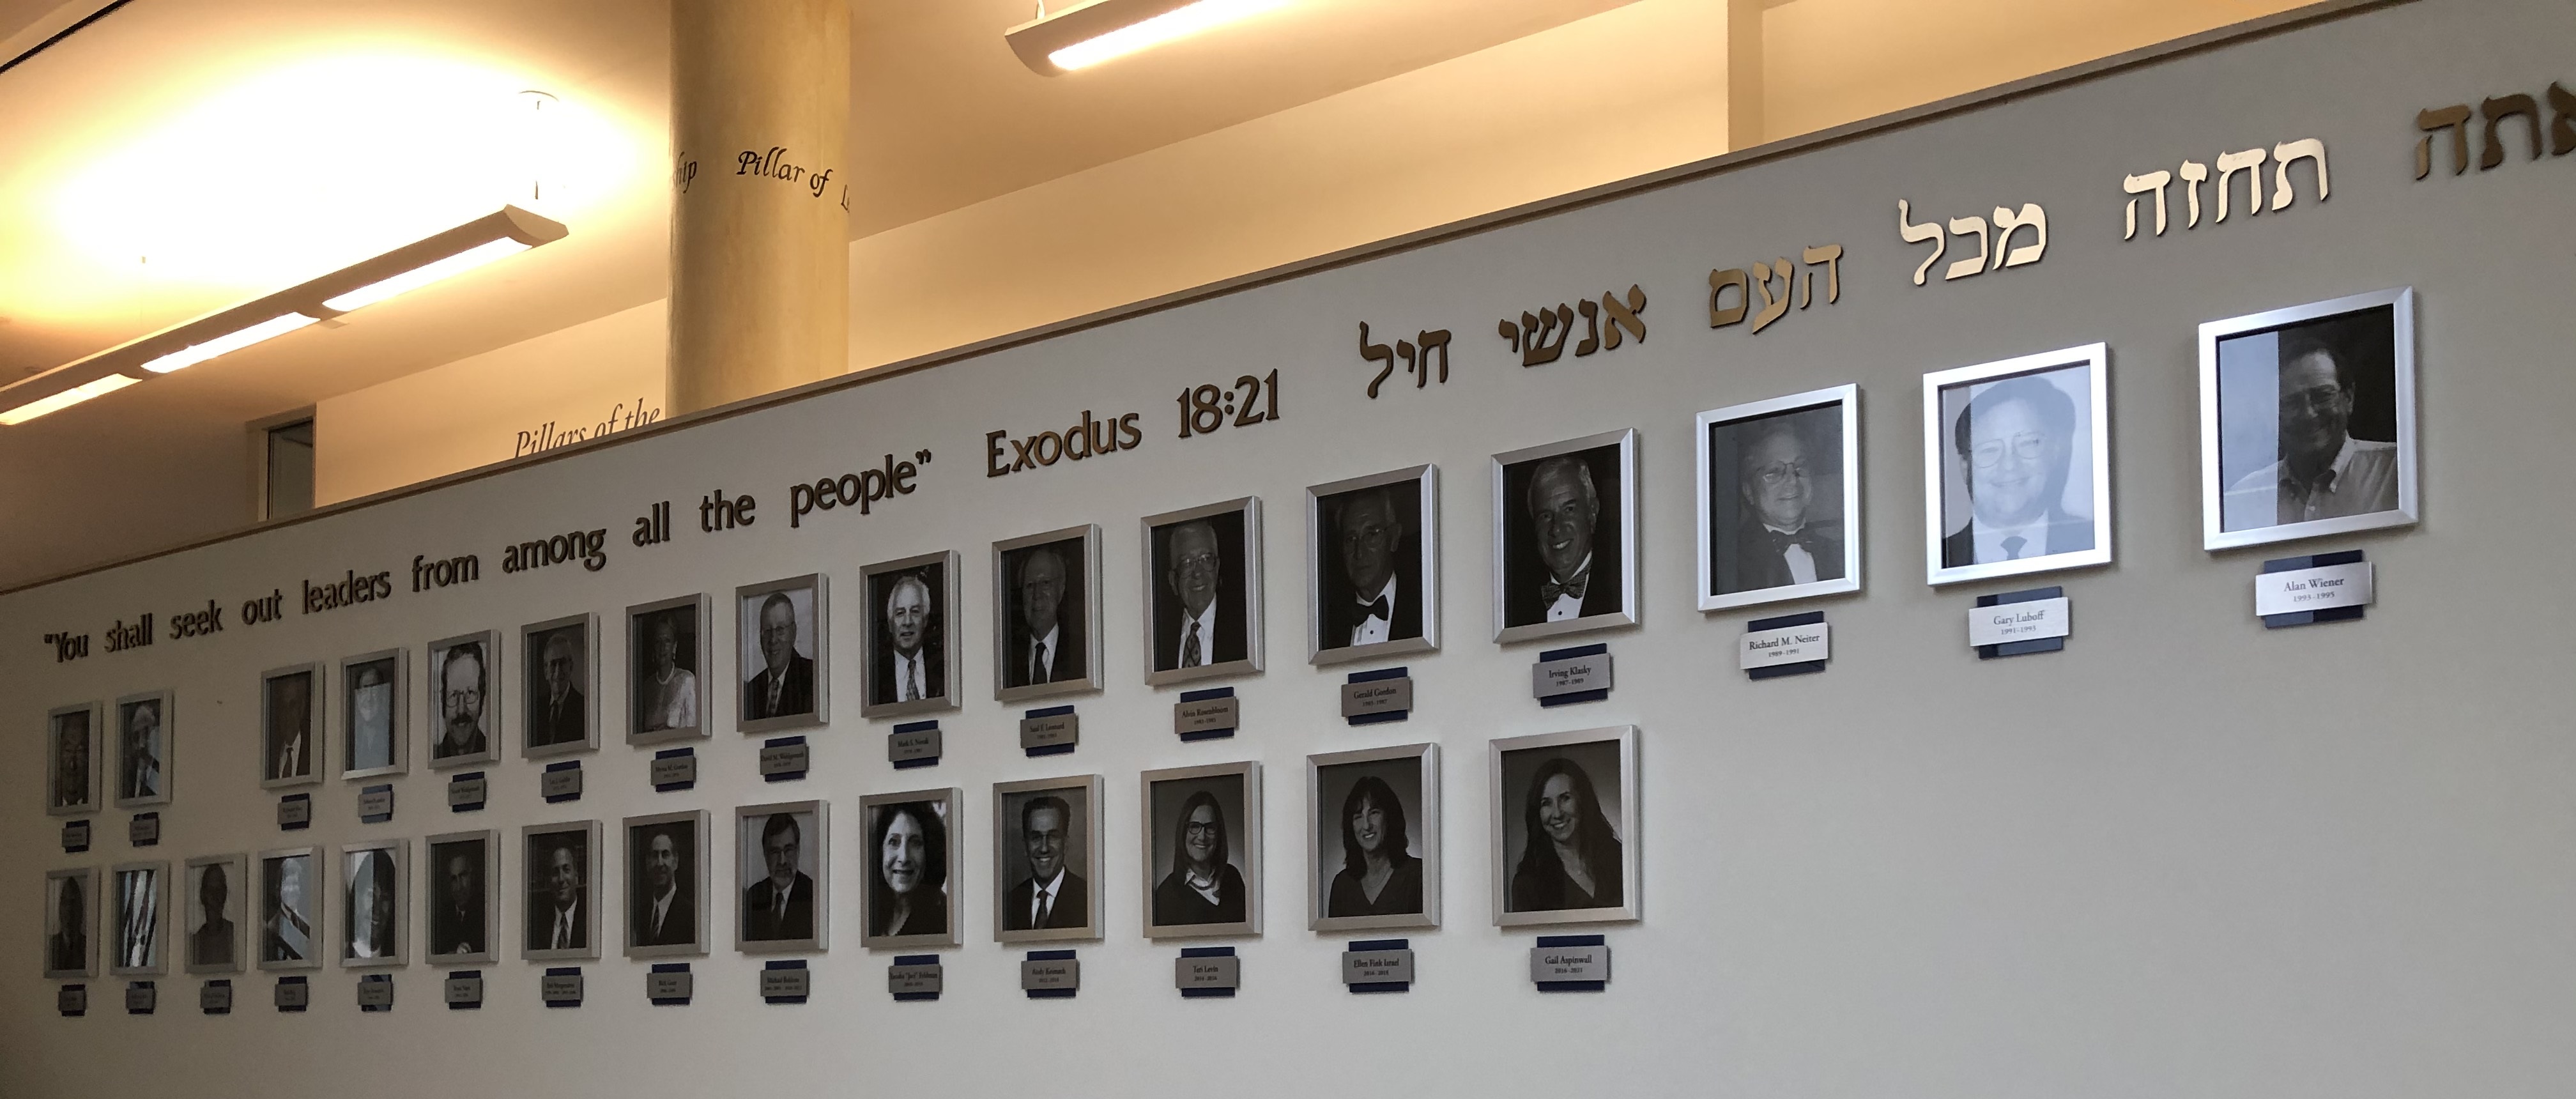 Temple Judea wanted to commemorate its past presidents. So we created multi-layered wall name plaques to label each president's photo and years served.